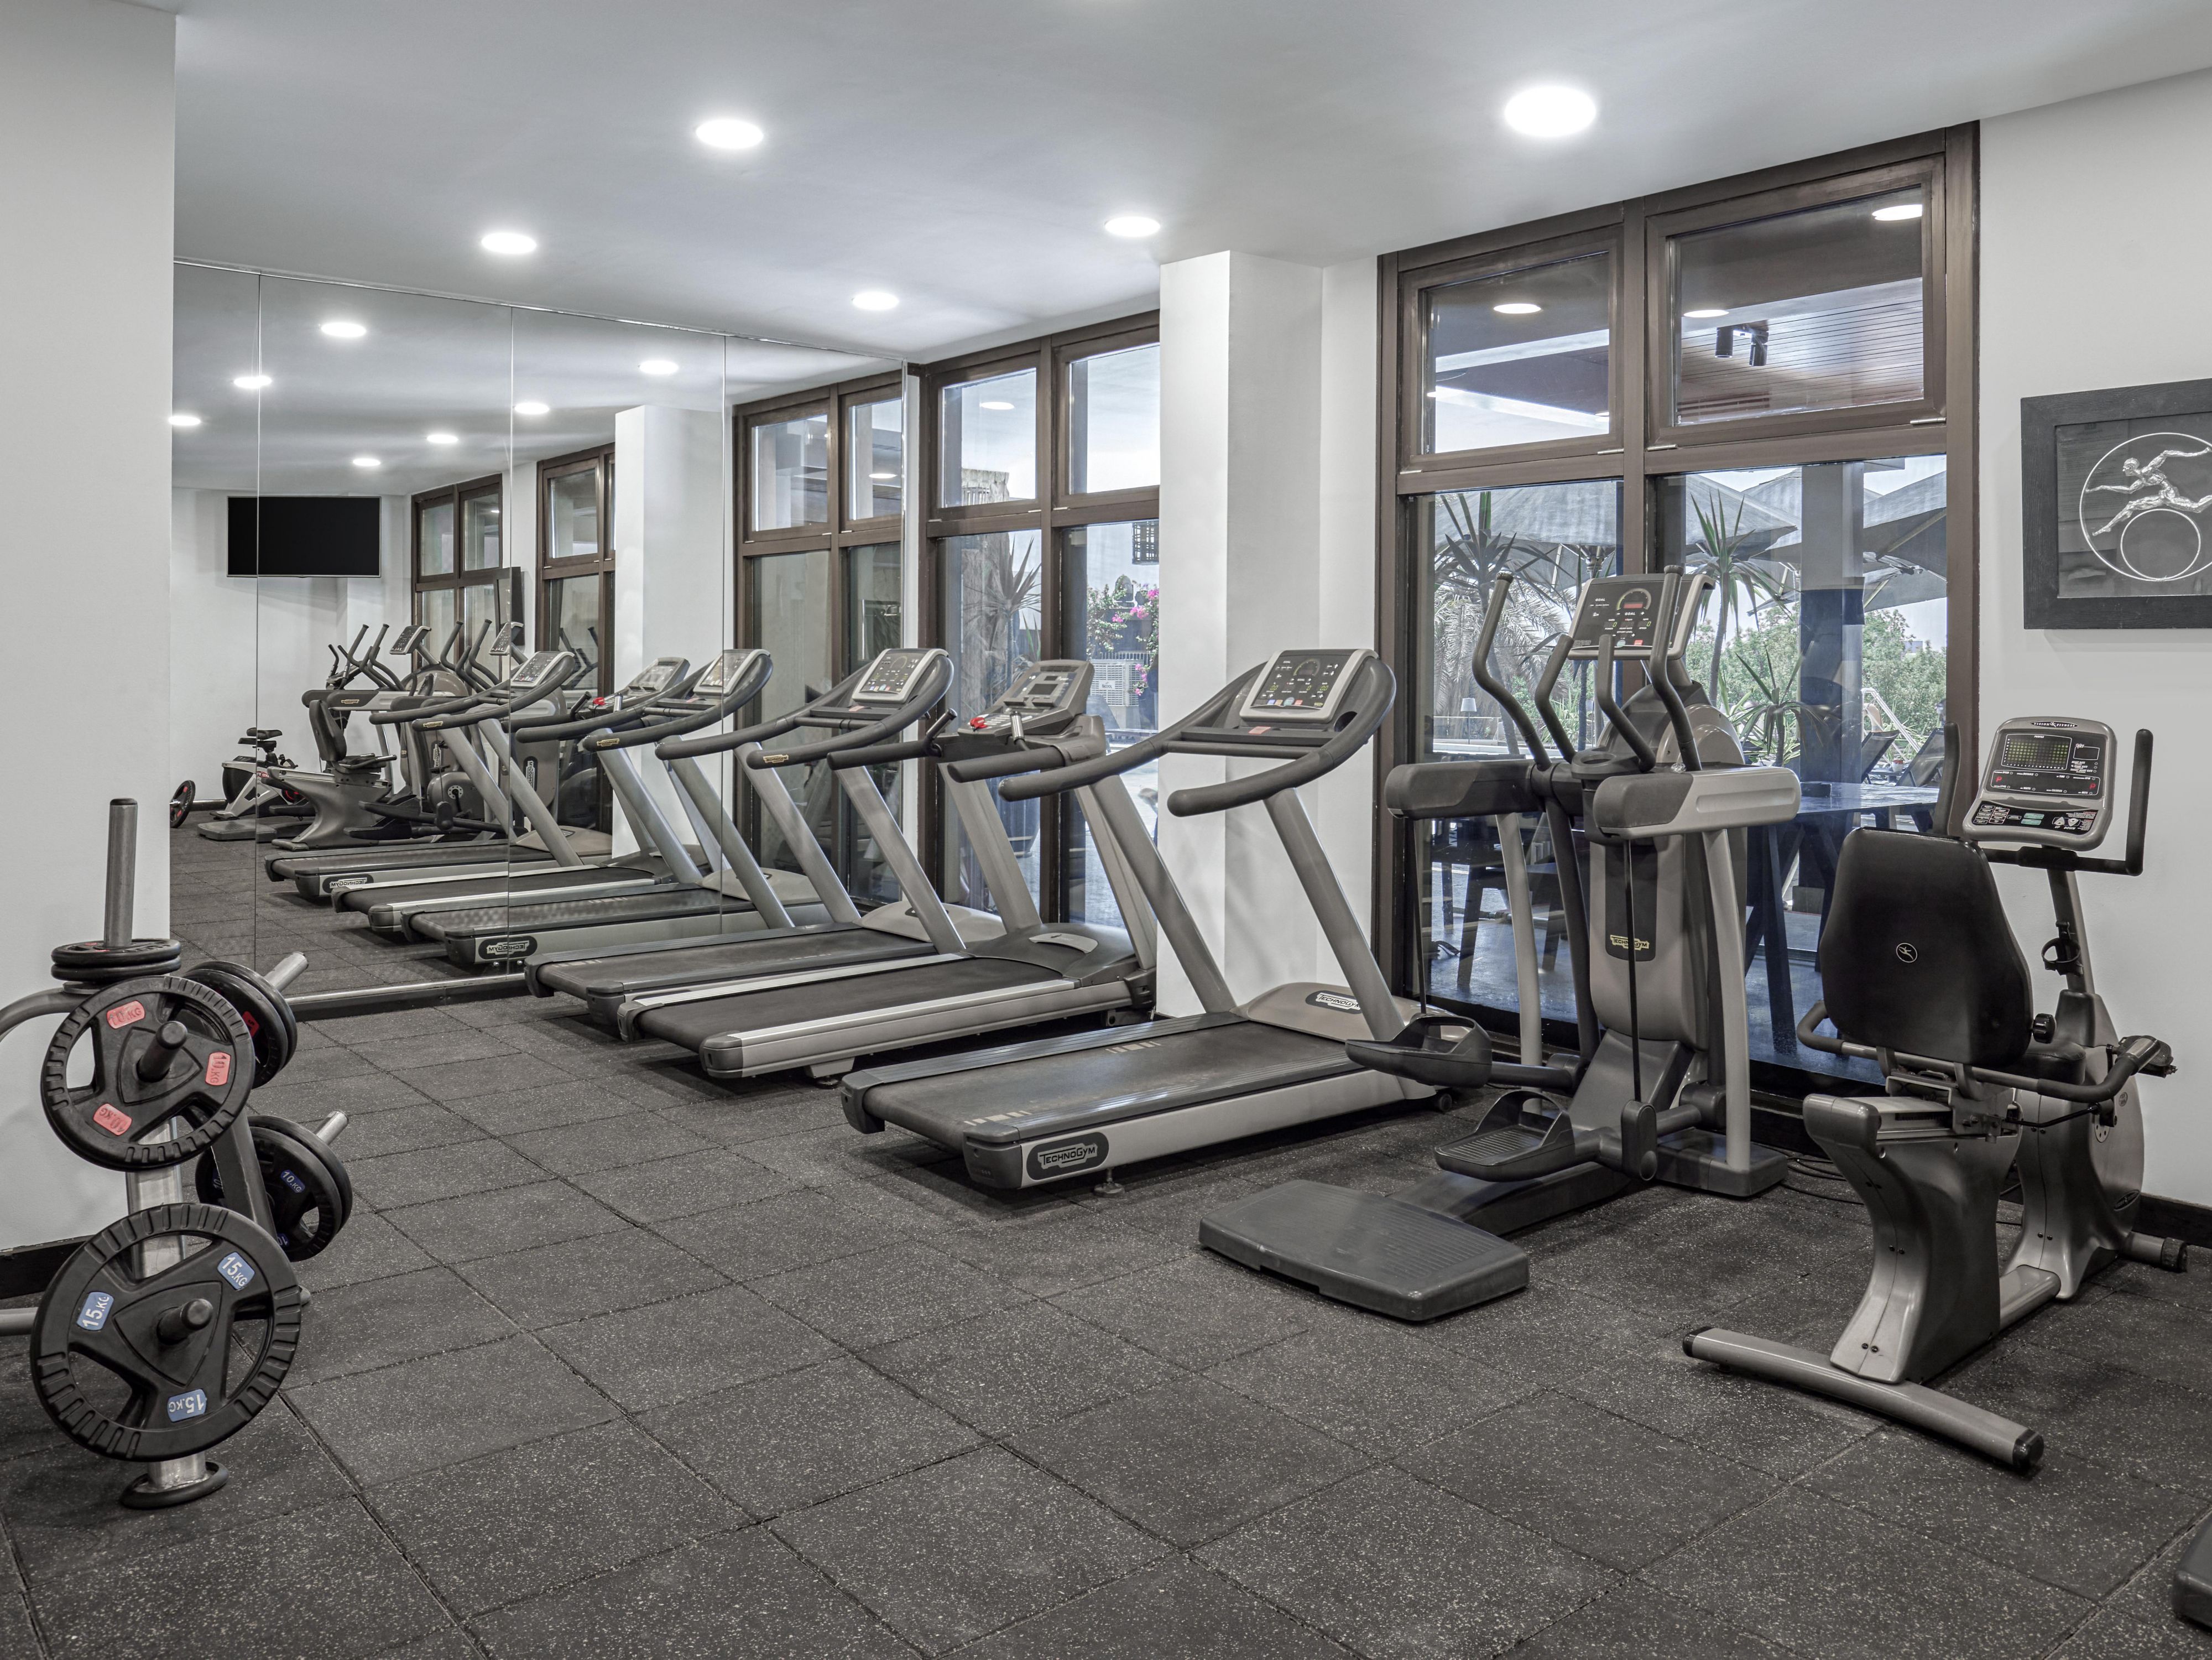 Being on vacation or a business trip doesn't mean that you don't stay fit. Enjoy your stay at Holiday Inn Cairo Maadi and don't forget to workout at our very own gym that overlooks the magnificent river Nile. The gym is fully equipped with cardio and strength machines. Nothing beats working out with a breathtaking view.